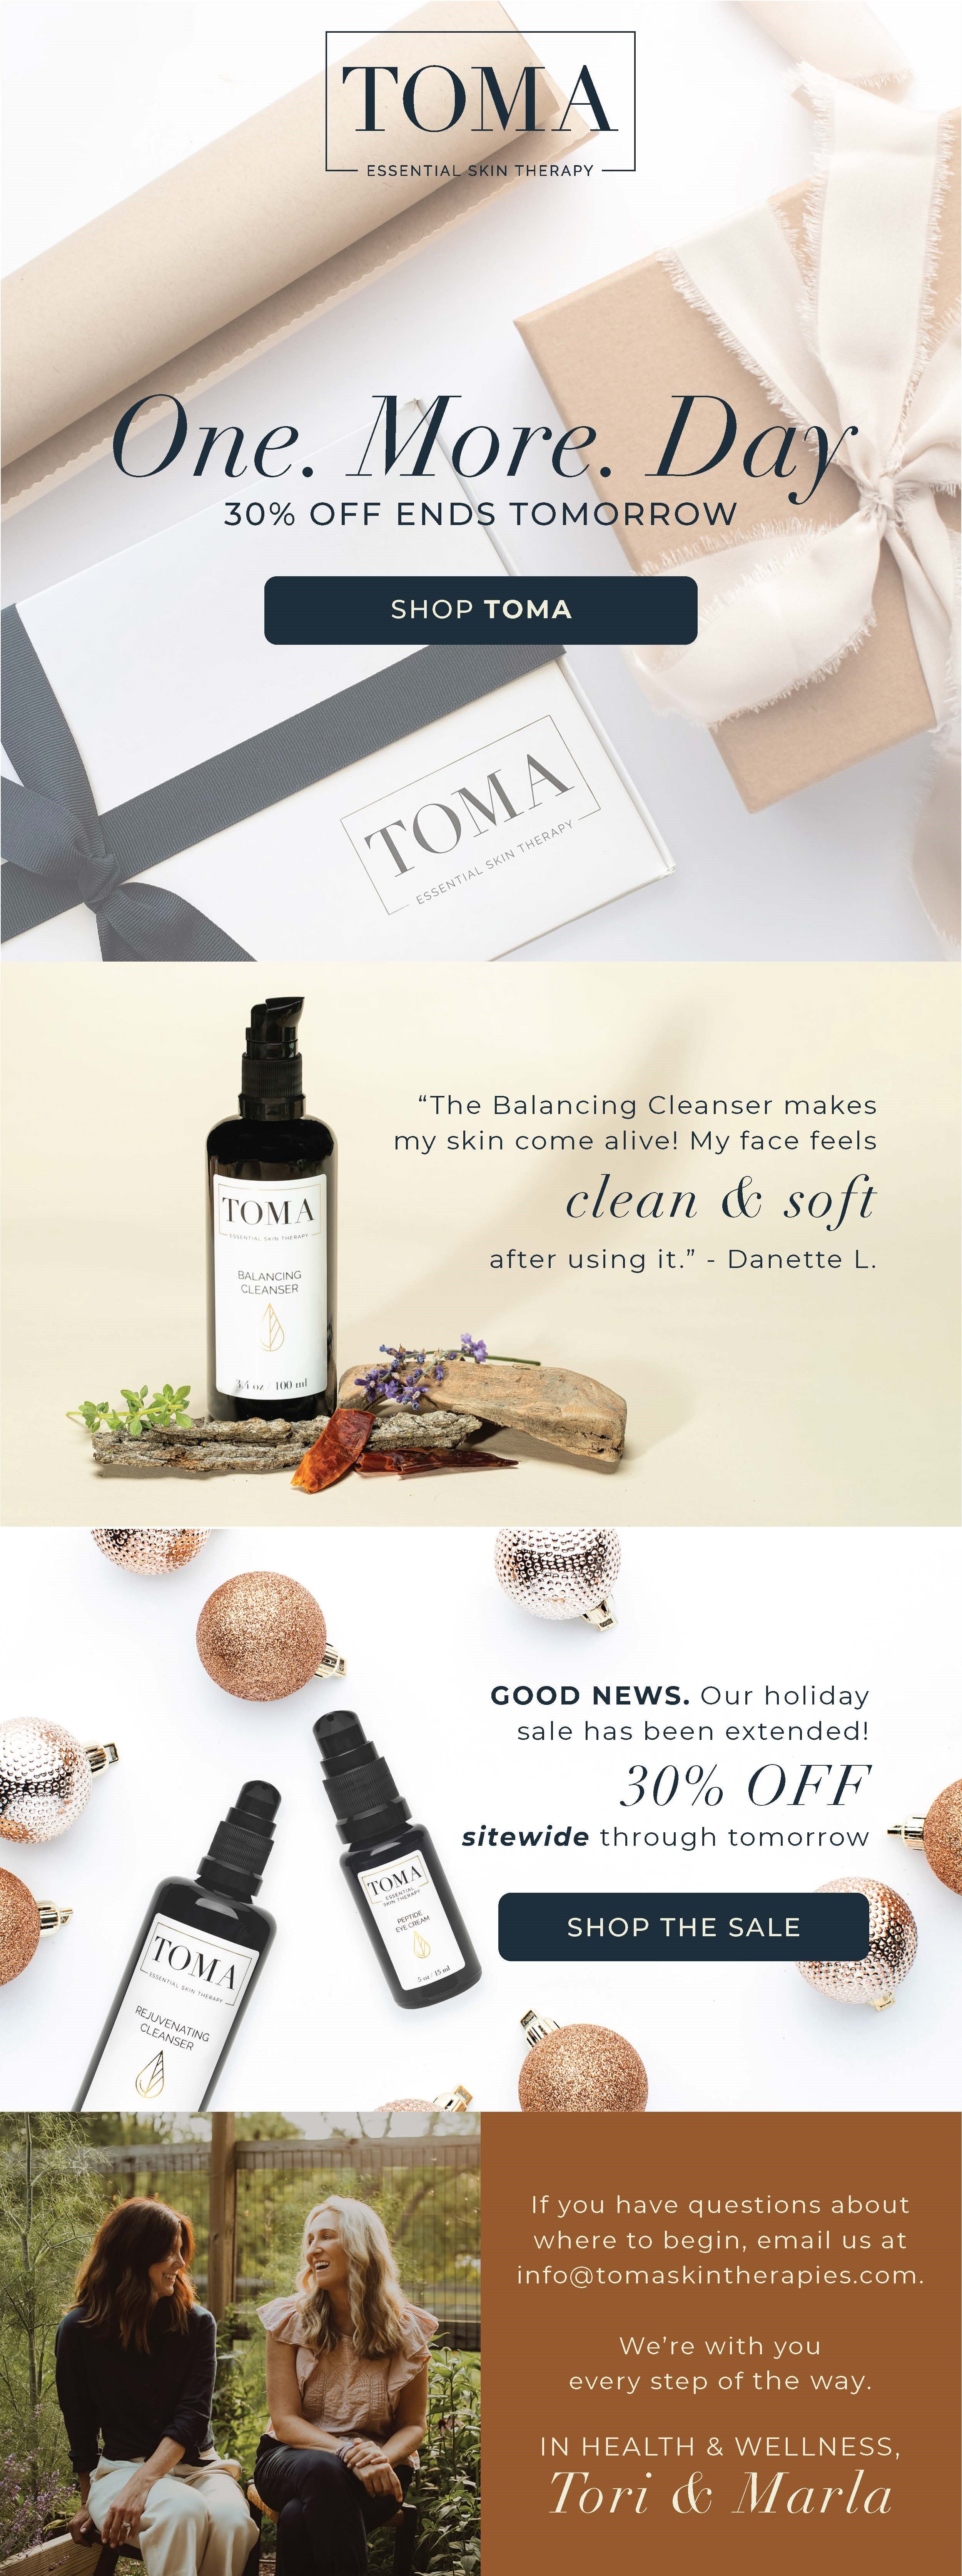 Toma Skin Therapies Email - Holiday 6 Black Friday Extended.jpg